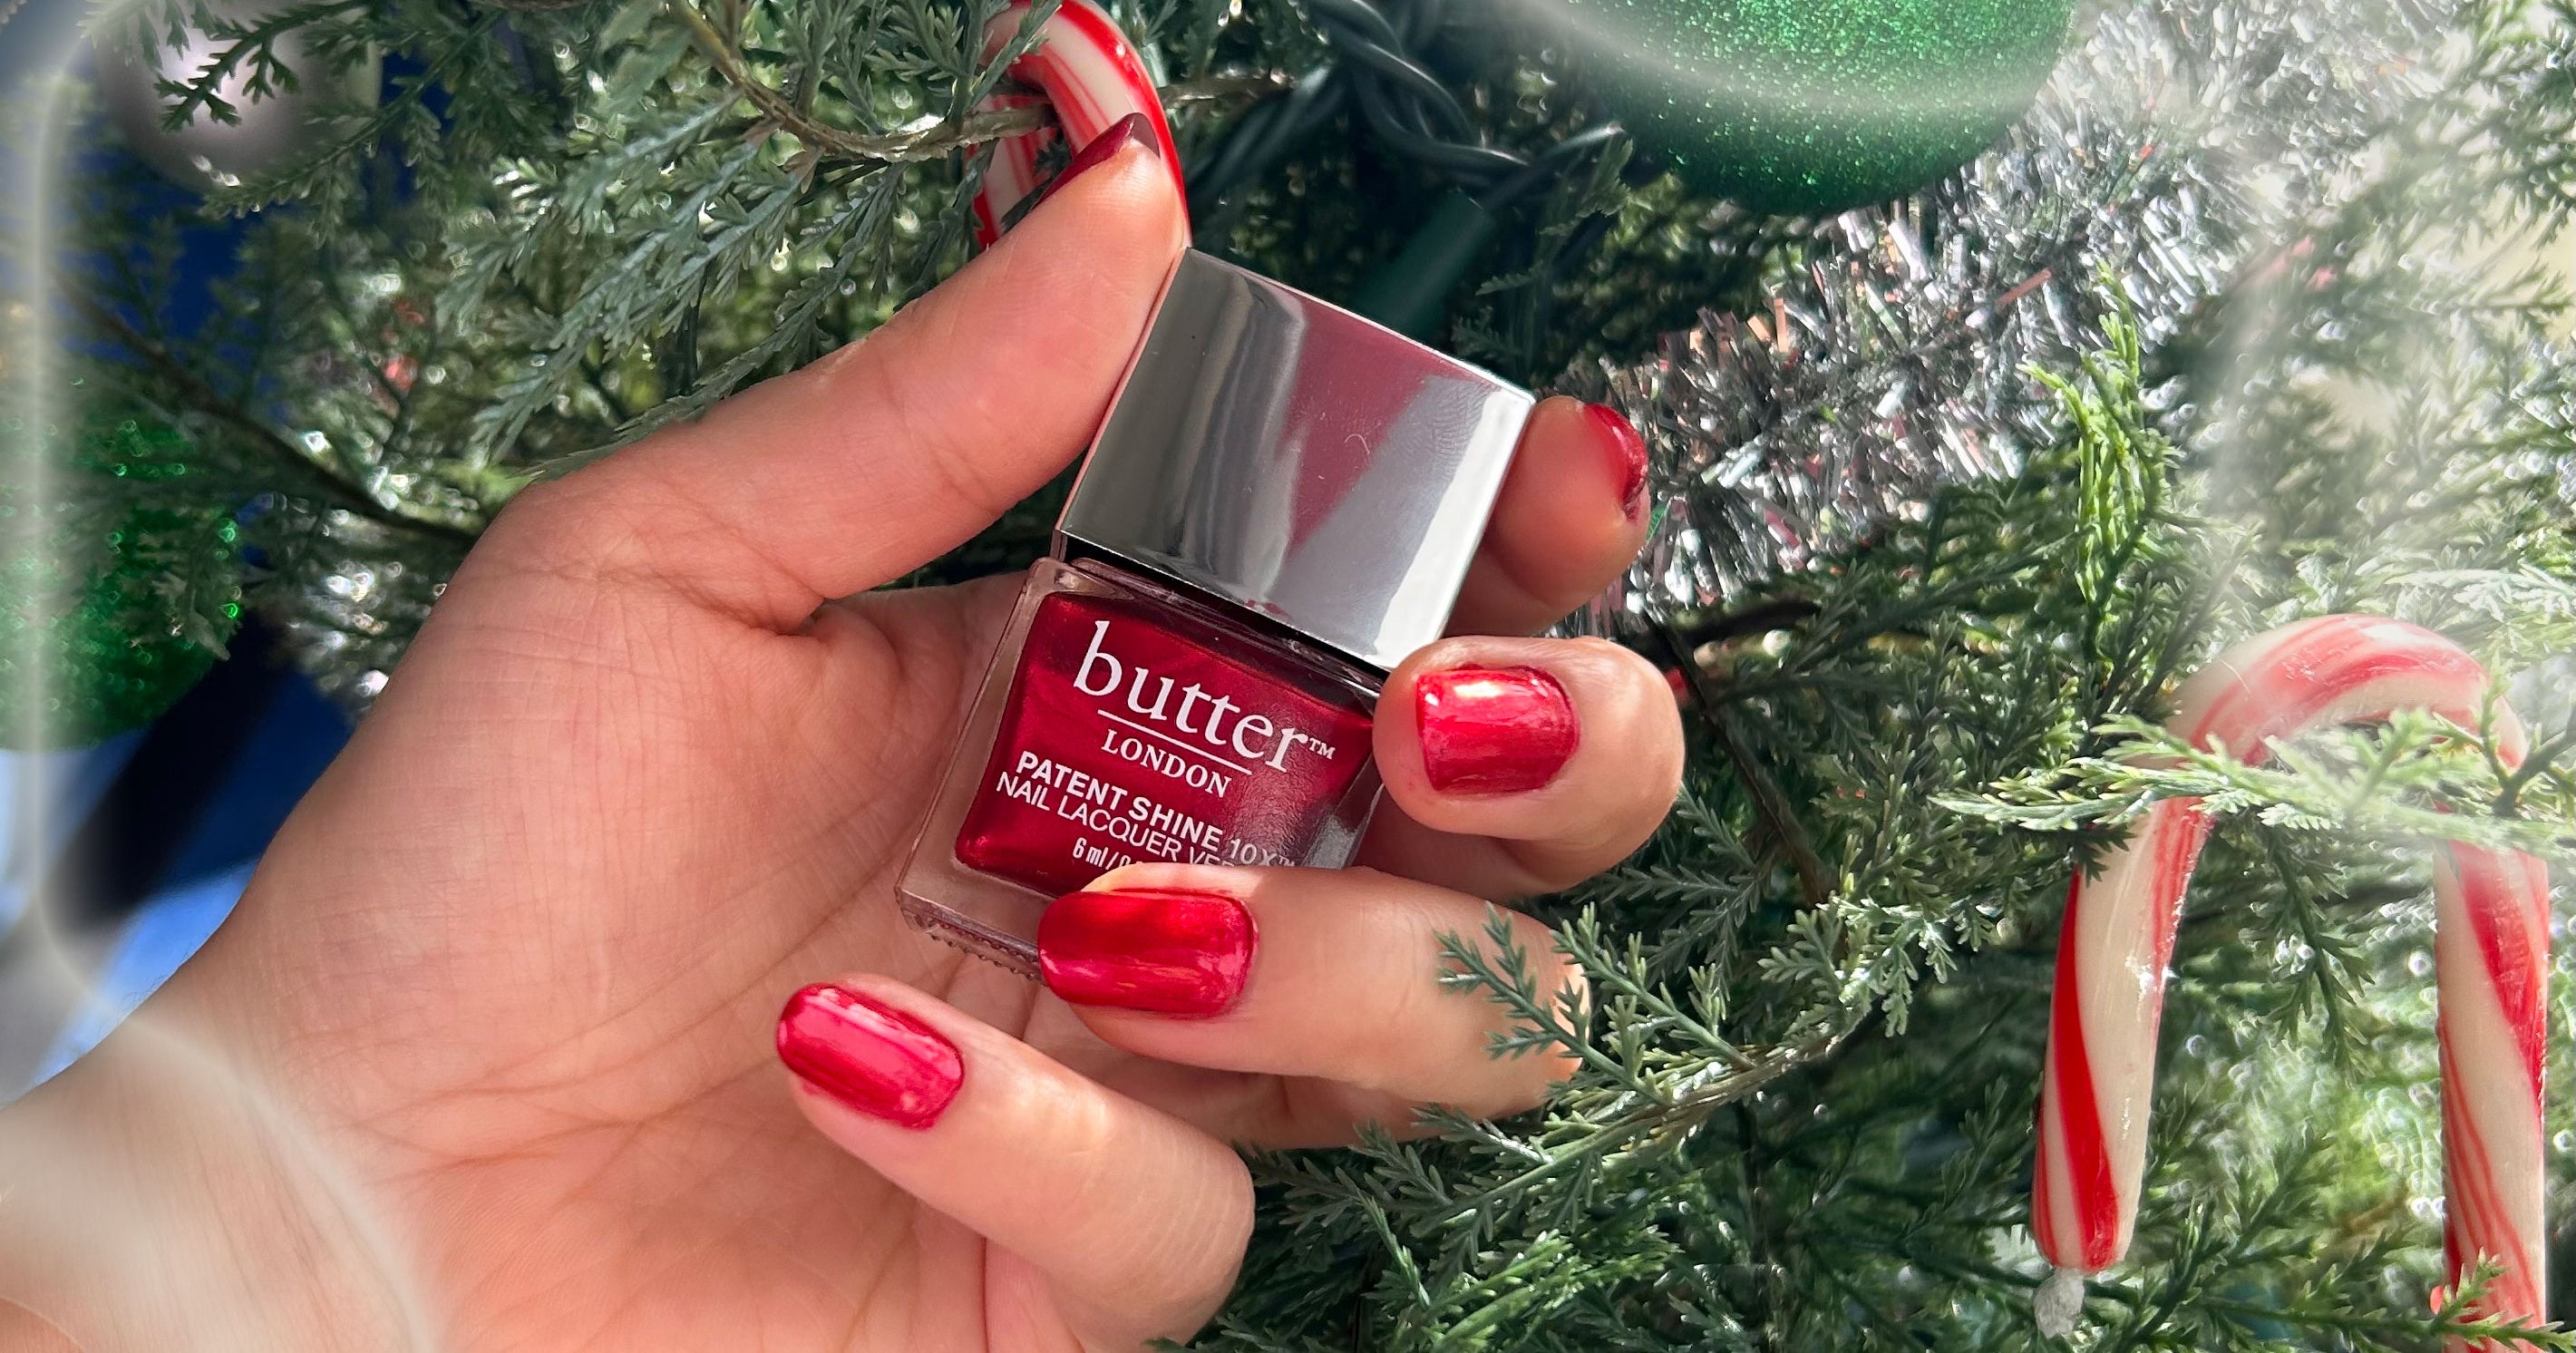 Found: The Perfect Metallic Mani For The Holidays